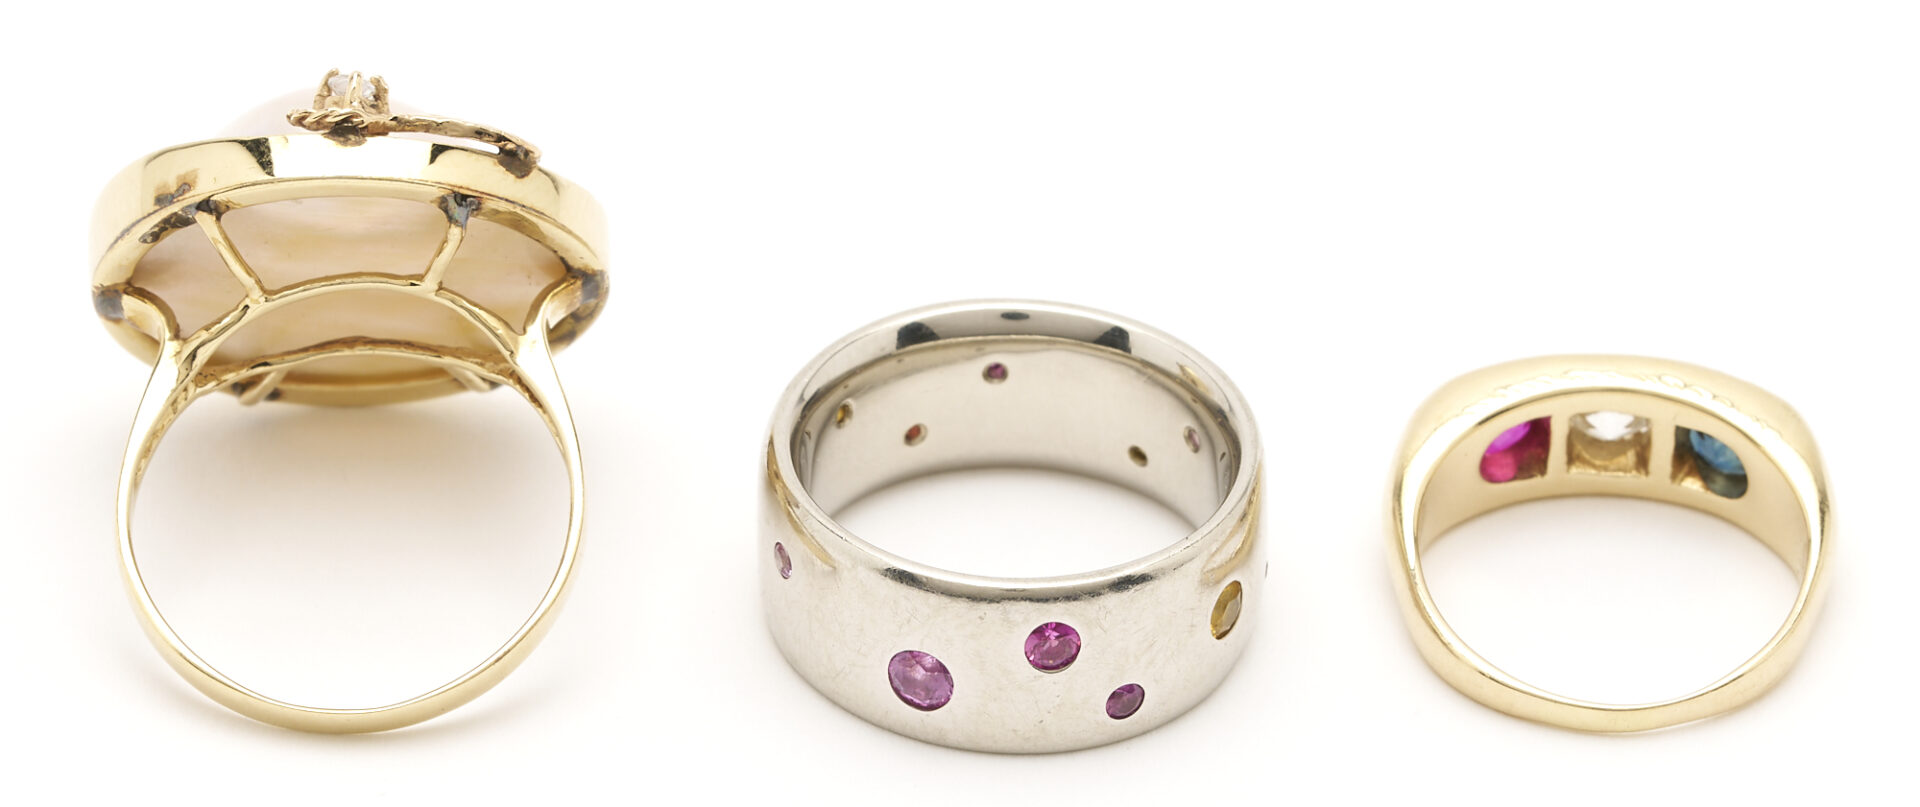 Lot 678: Group of 3 Gold & Gemstone Rings